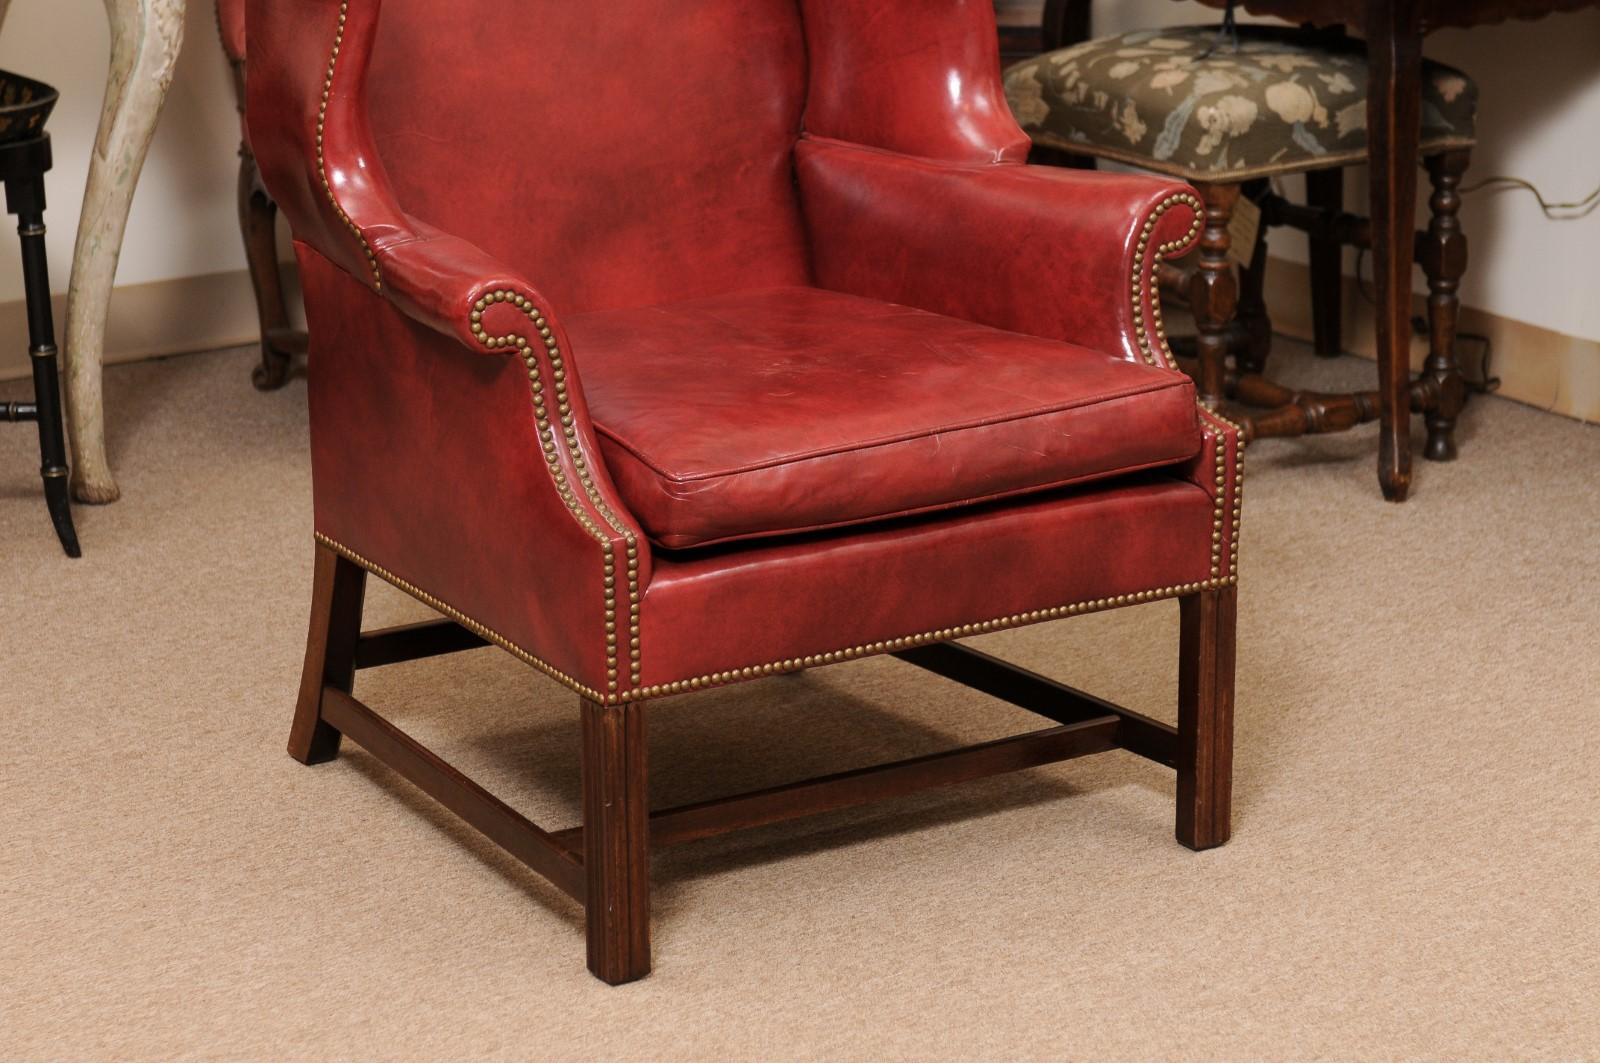 20th Century English Wing Chair in Mahogany & Red Leather Upholstery with Brass  For Sale 4